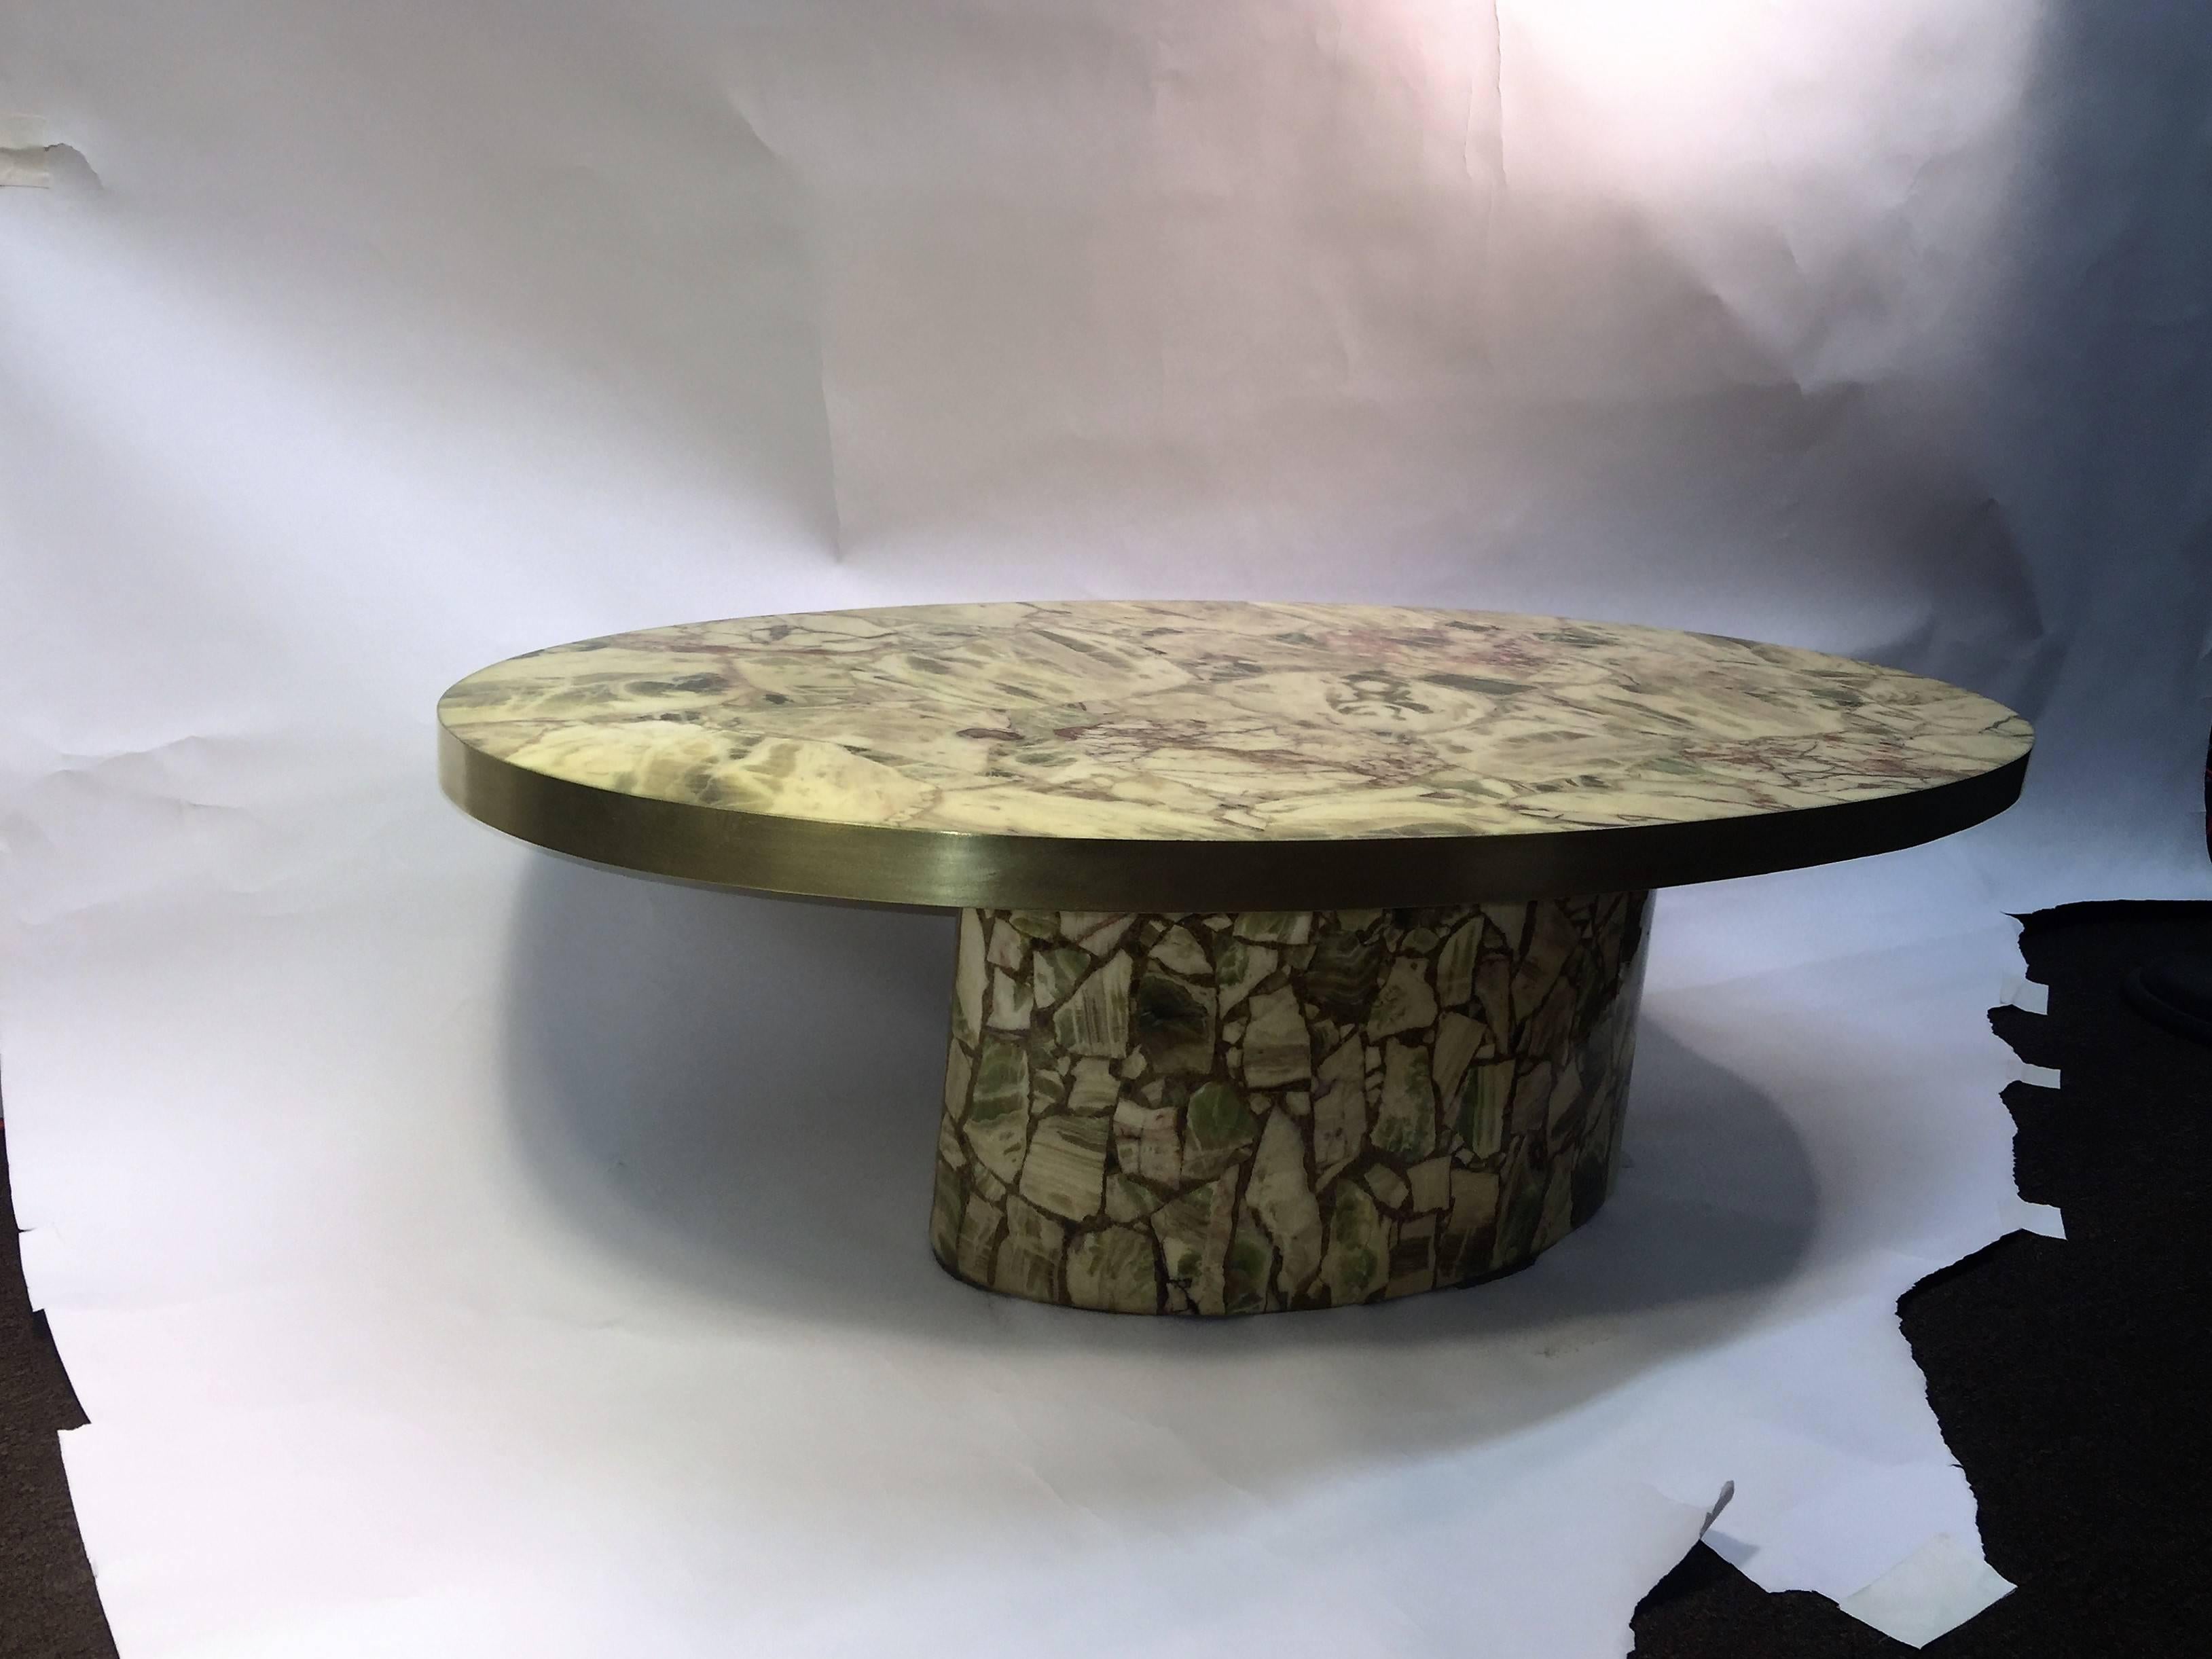 1970s great oval coffee table comprised of specimens of green onyx encased in Resin. The oval top inset in a brushed brass frame seated upon a pedestal base. Very high end and substantial table designed and created in Italy with fantastic colored